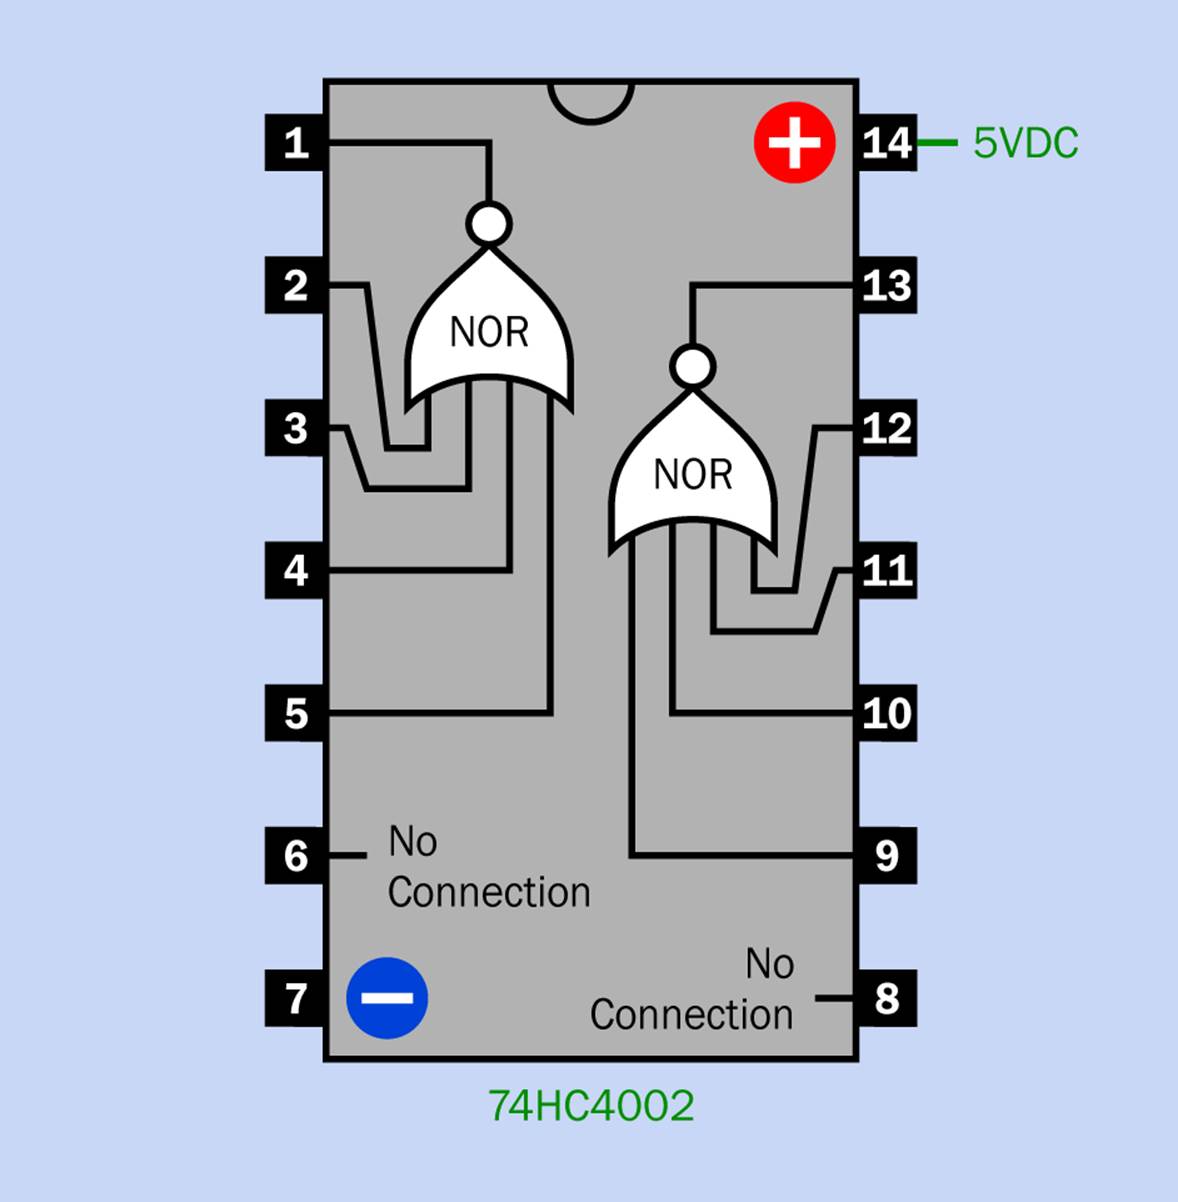 Pinouts of the 74HC4002 dual quad-input NOR chip.